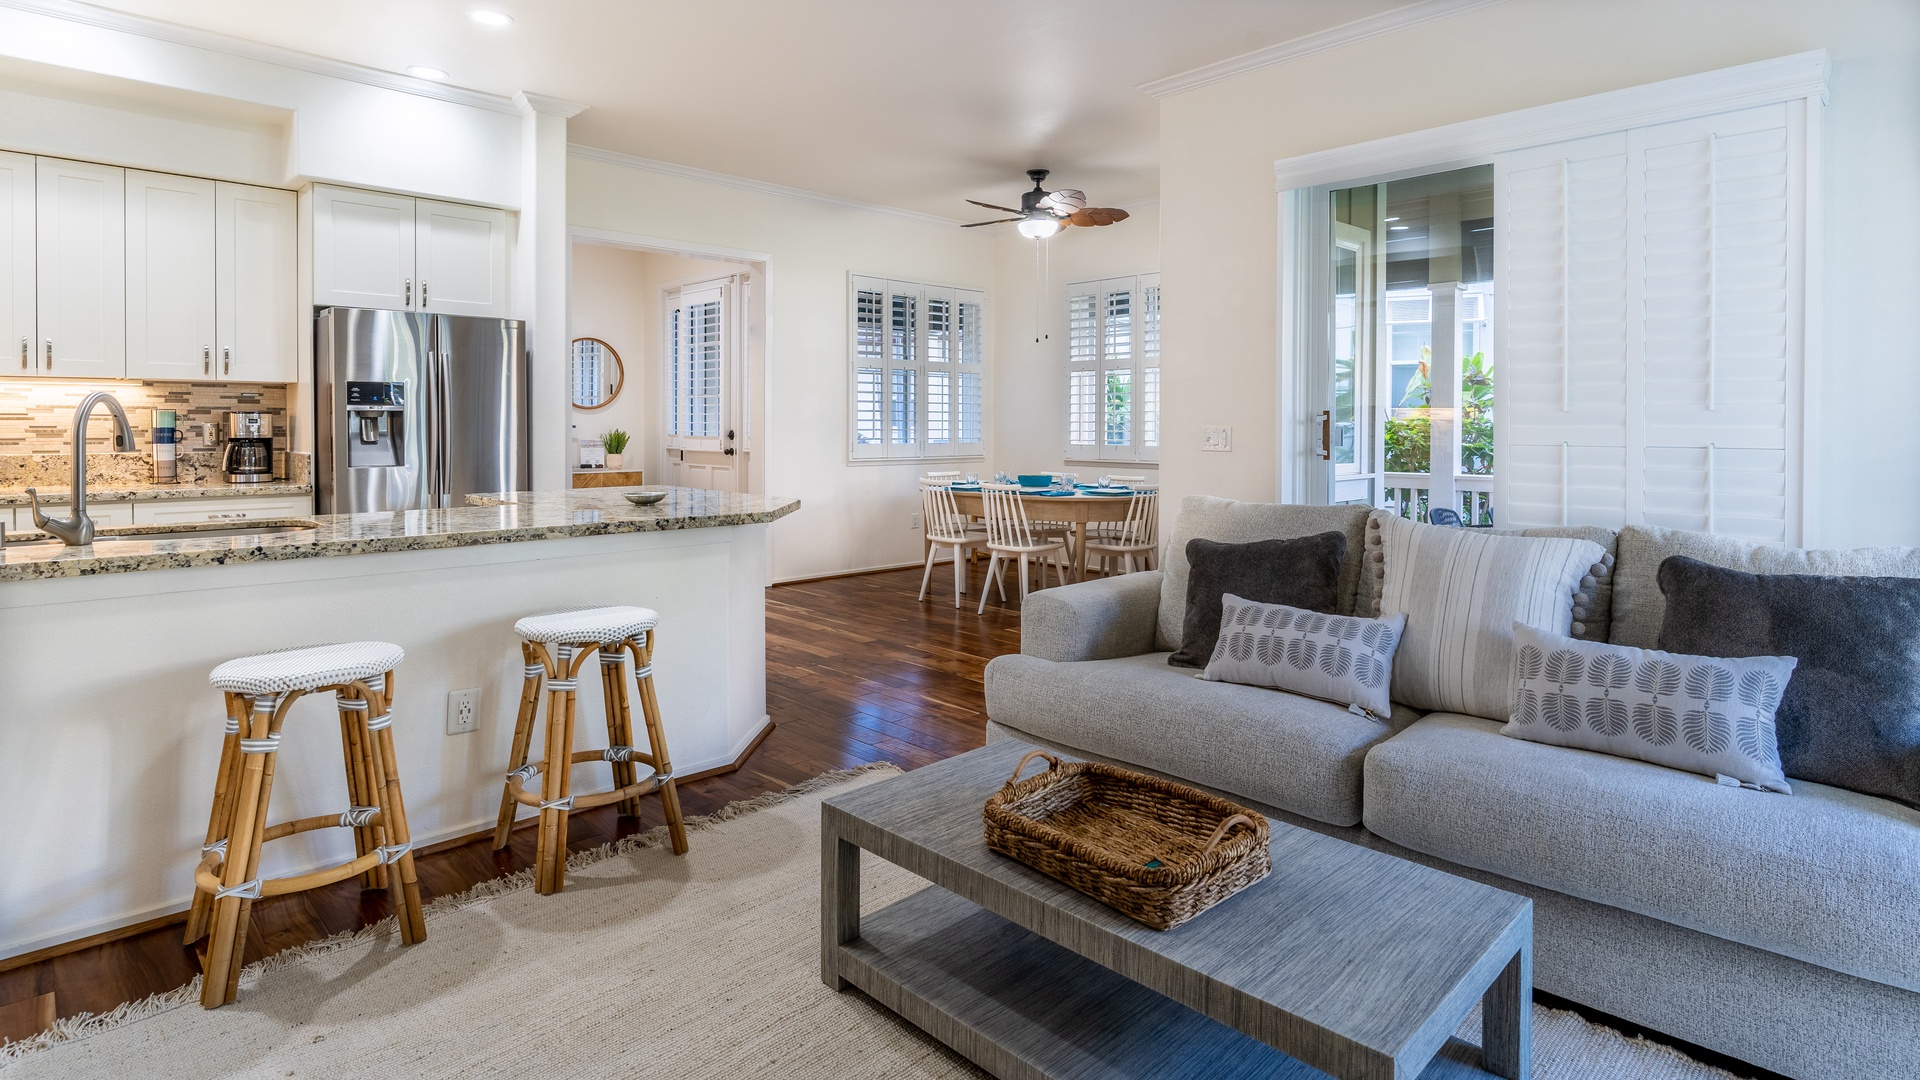 Kapolei Vacation Rentals, Coconut Plantation 1158-1 - Sink into the plush seating in the living area surrounded by natural wood tones.